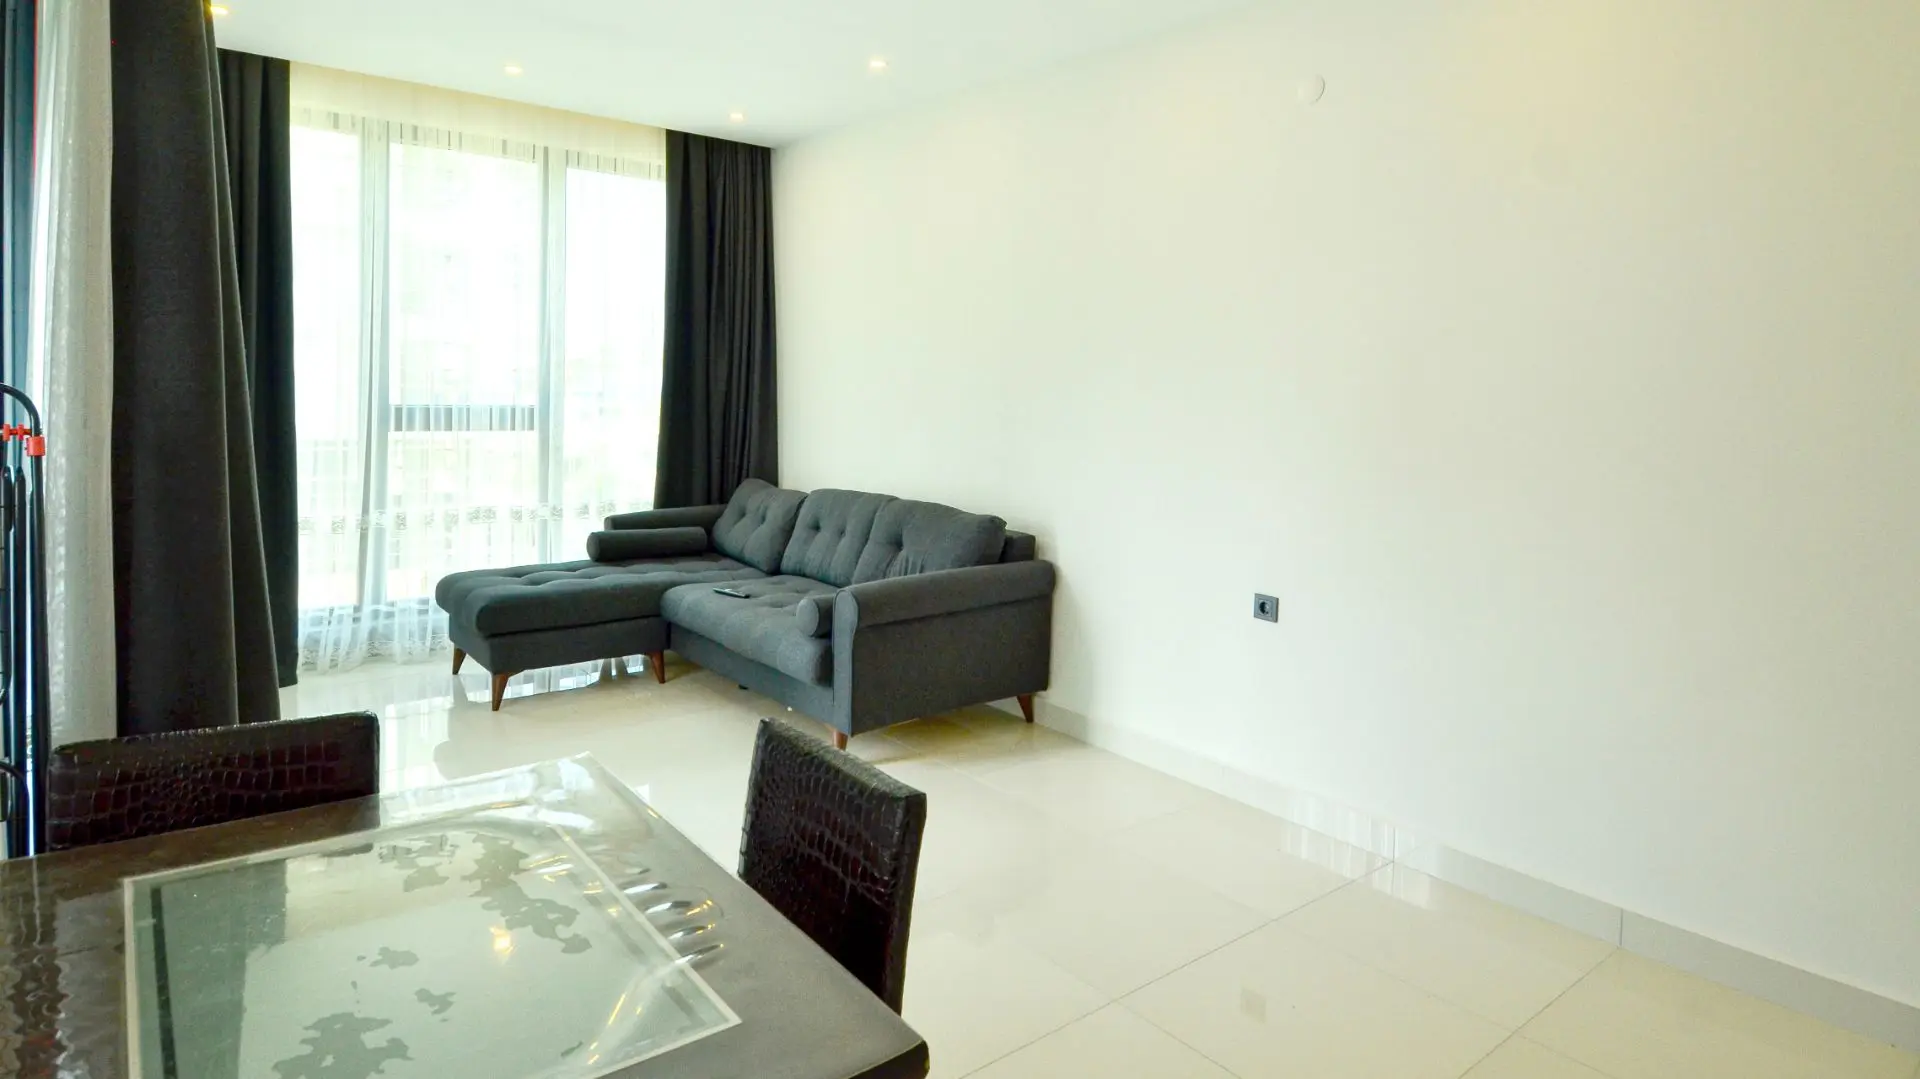 2+1 FLAT IN KARGICAK, ONLY 100 M TO THE SEA - FULL ACTIVITY